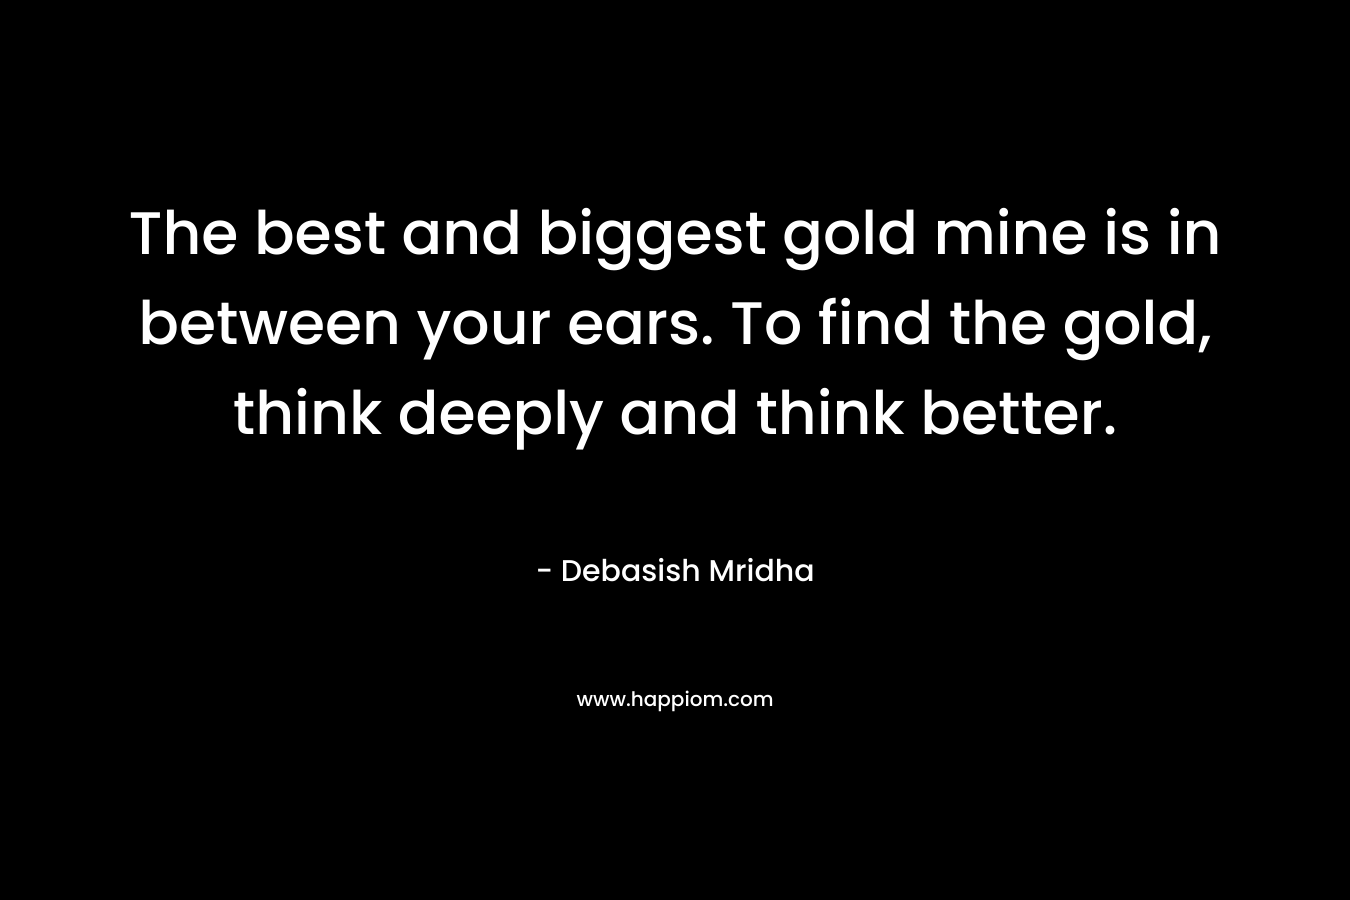 The best and biggest gold mine is in between your ears. To find the gold, think deeply and think better.